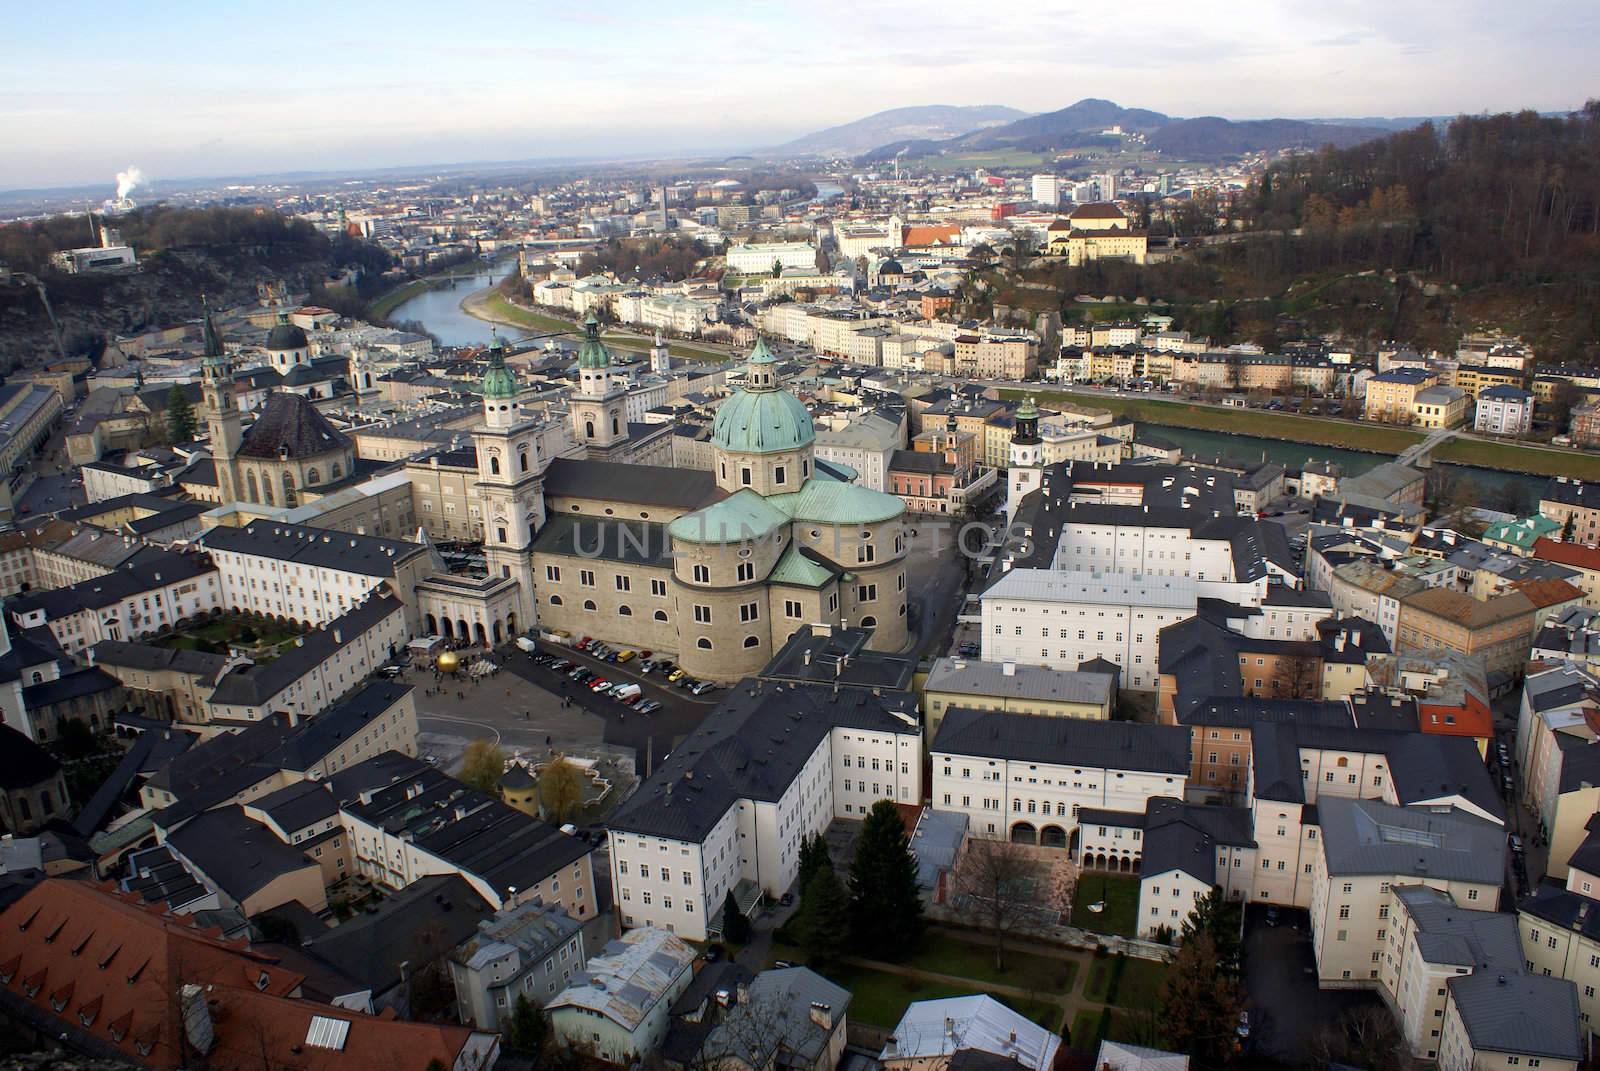 Aerial view of the historic city center of Salzburg